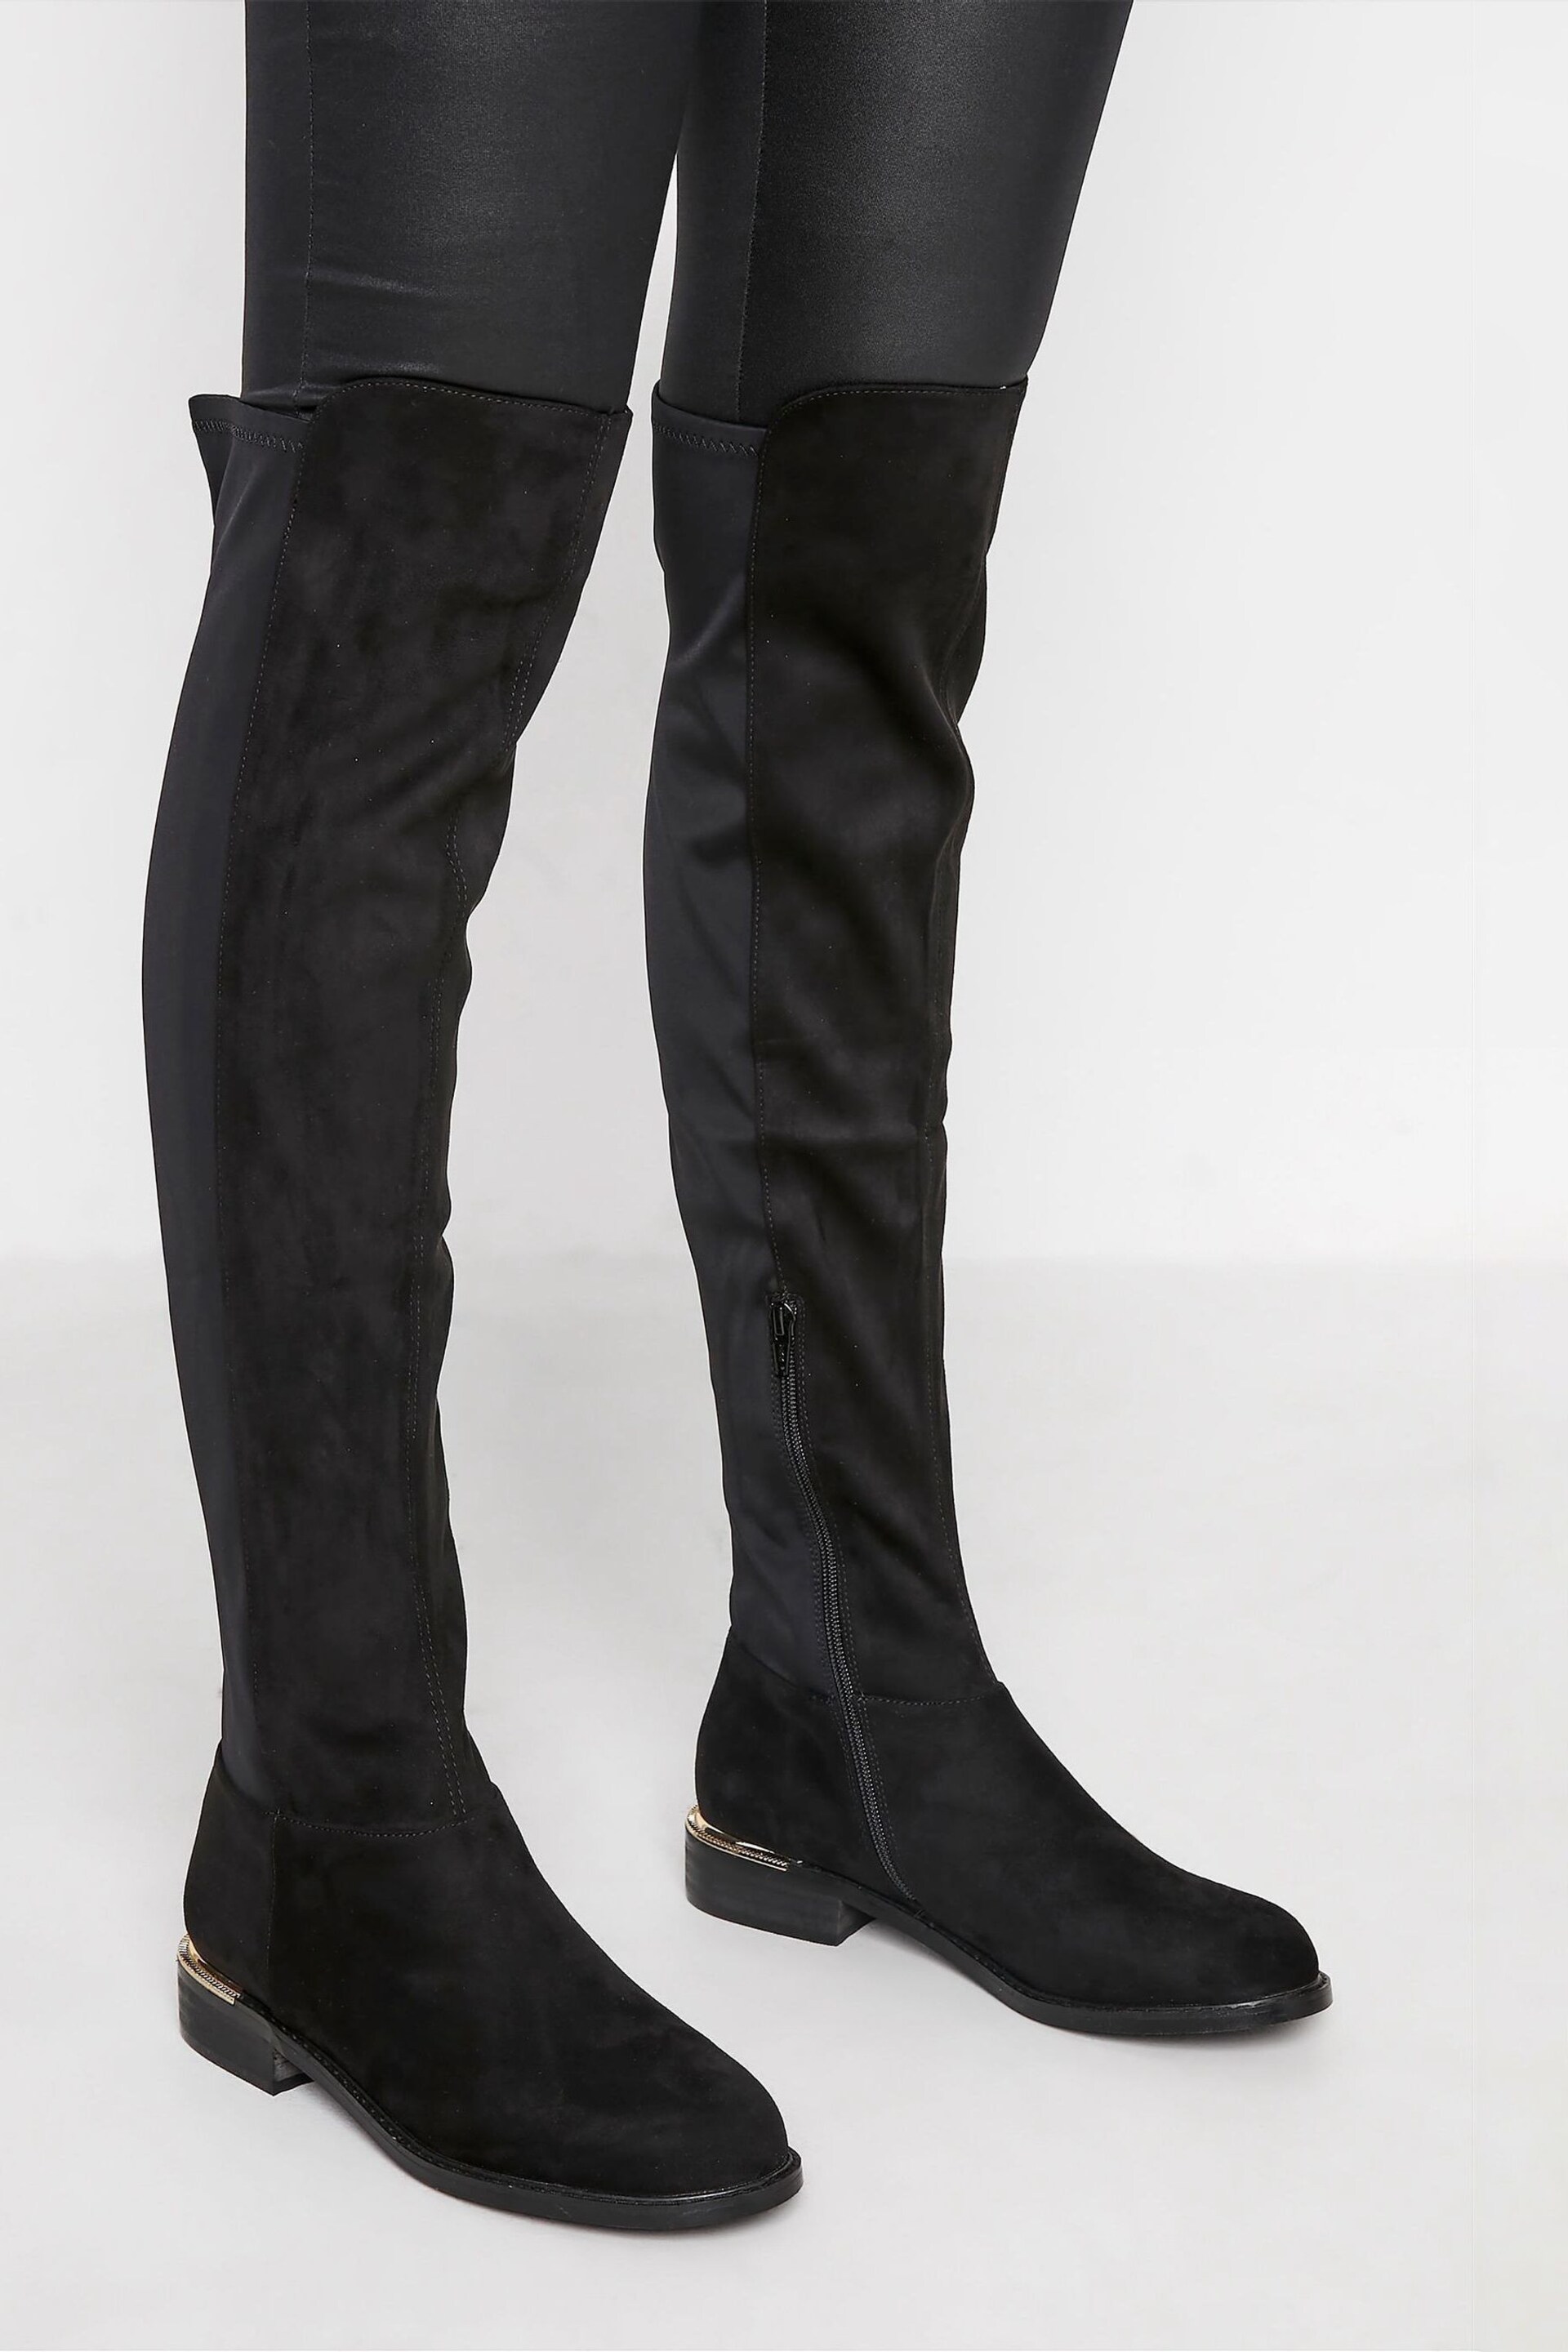 Long Tall Sally Black Stretch Boots - Image 1 of 4